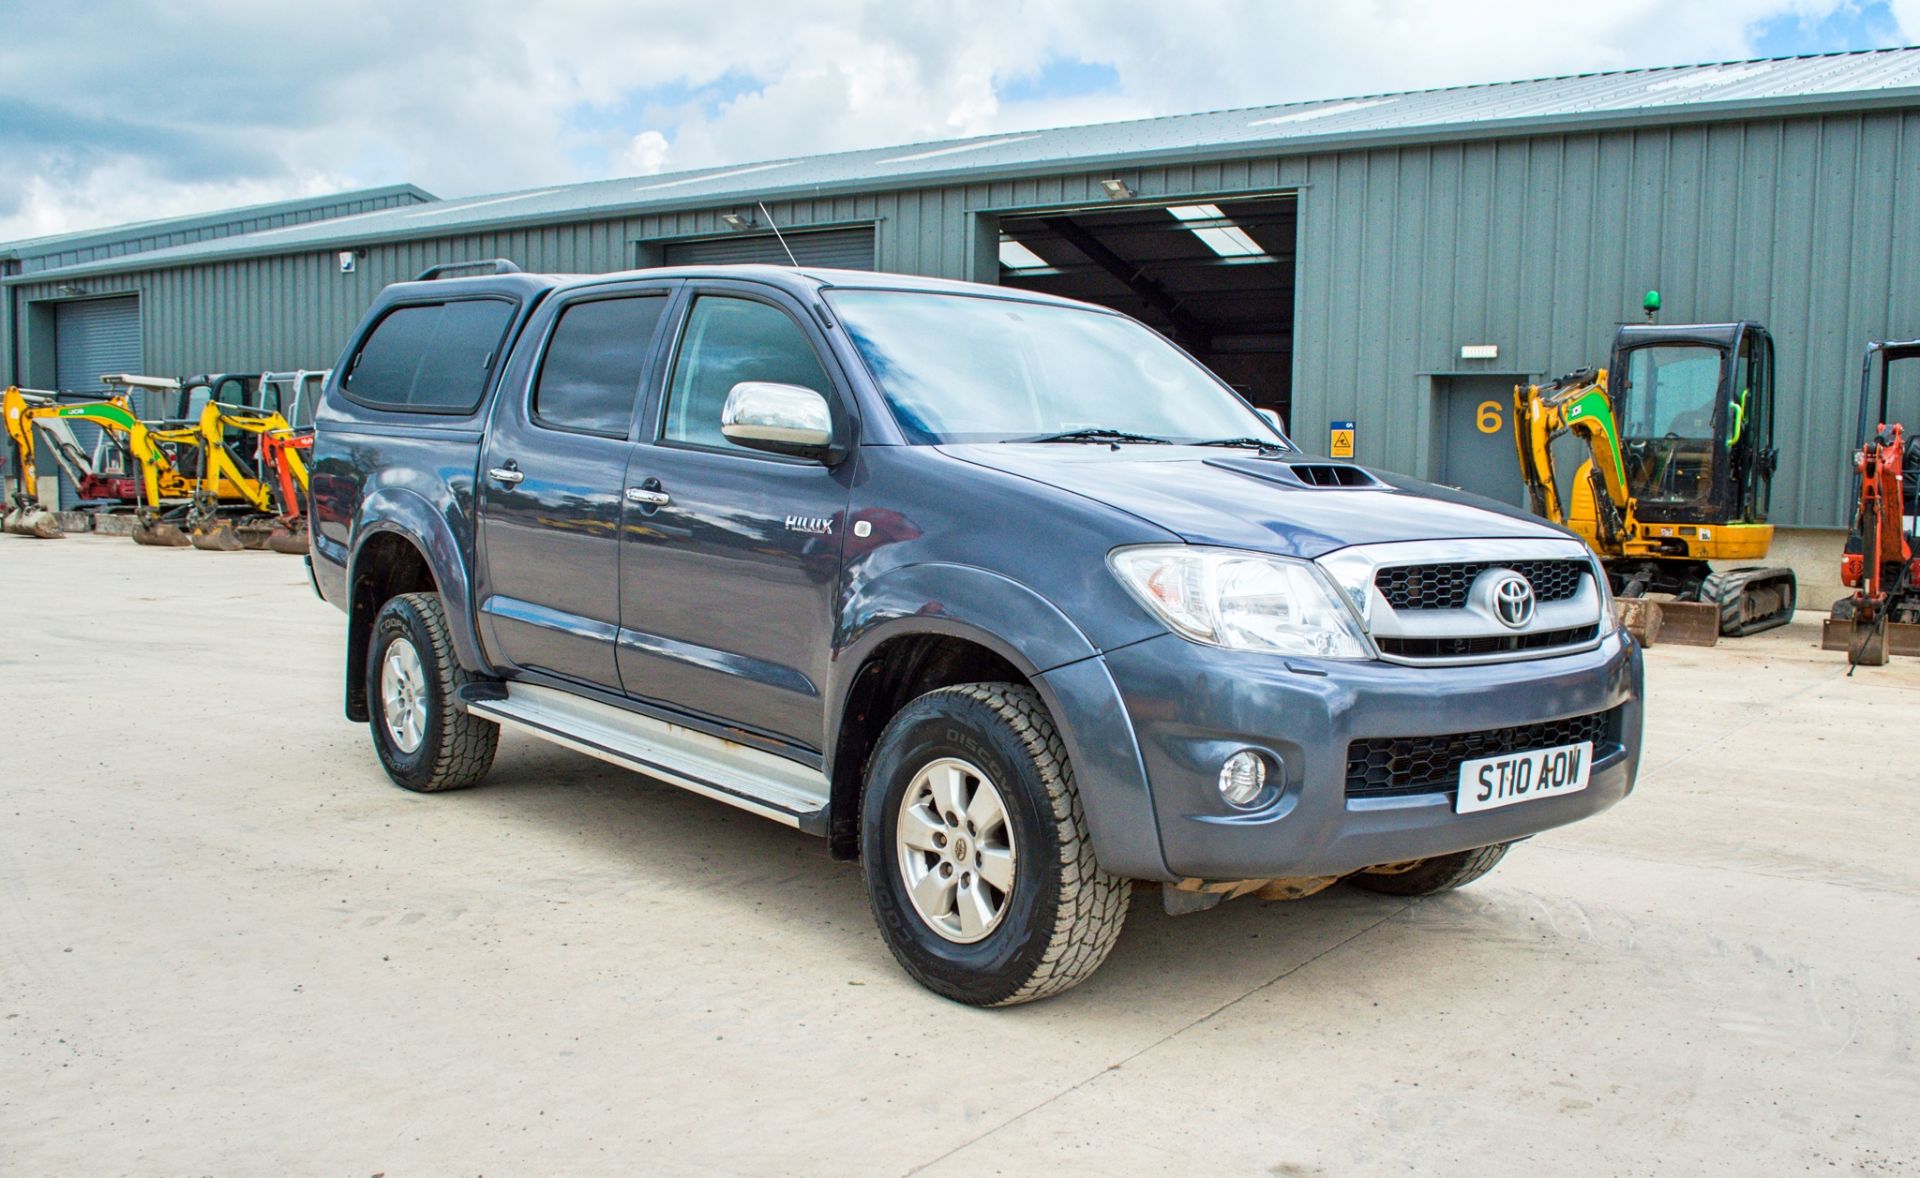 Toyota Hilux 2.5 D-4D 144 HL3 4wd manual double cab pick up Reg No: ST10 AOW Date of Registration: - Image 2 of 25